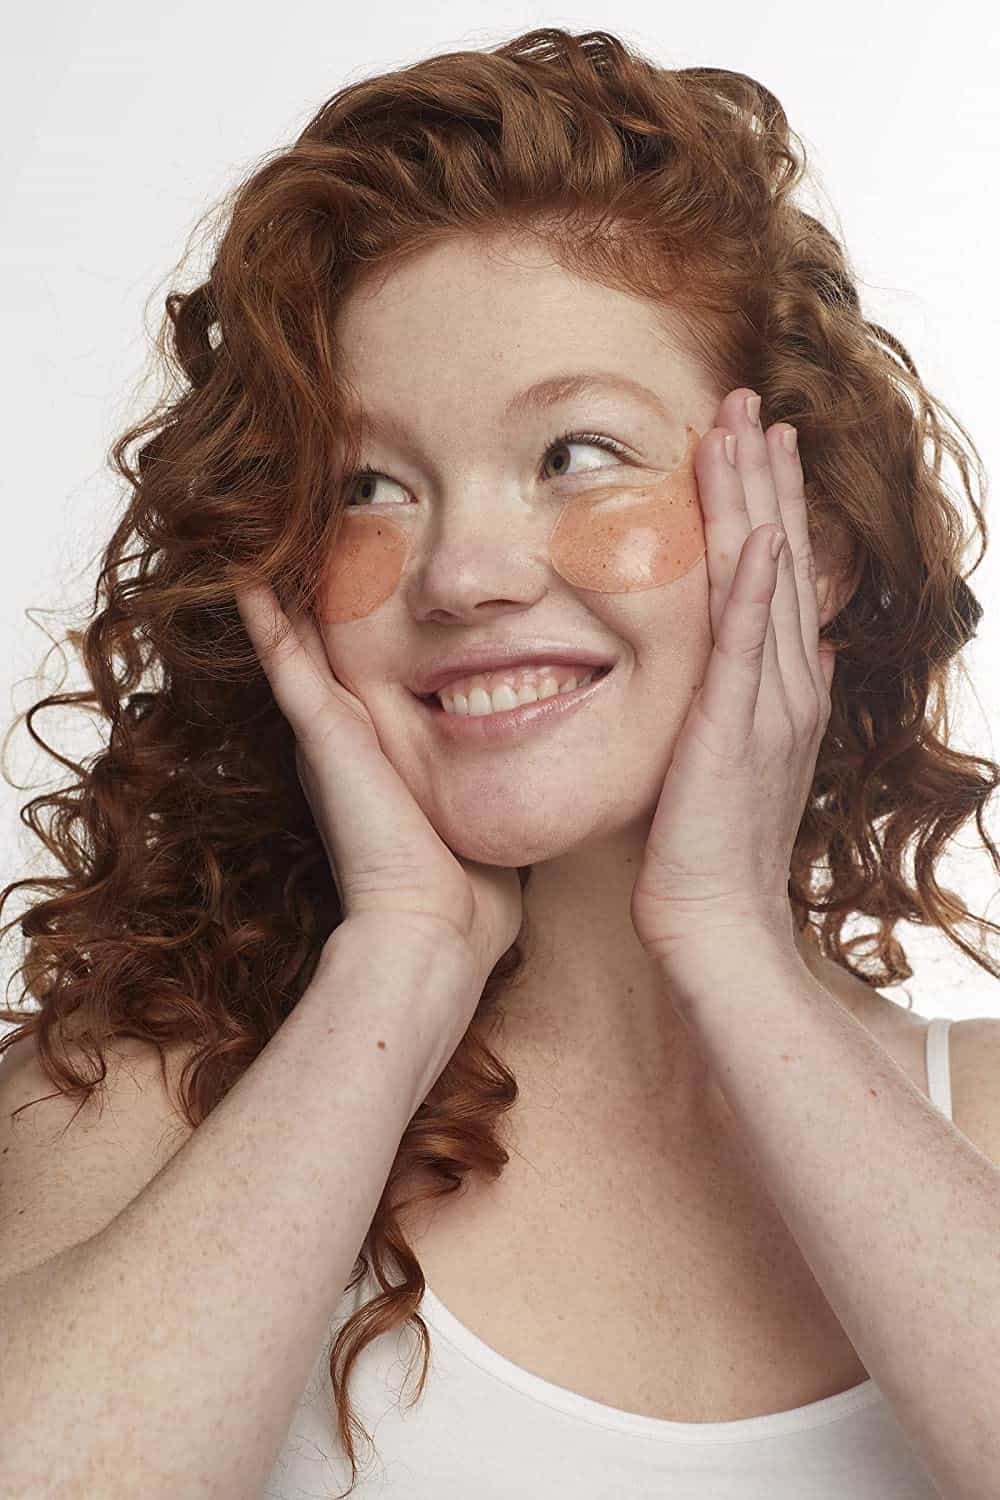 Do Under Eye Patches Actually Work? We Tested Them On Redhead Skin